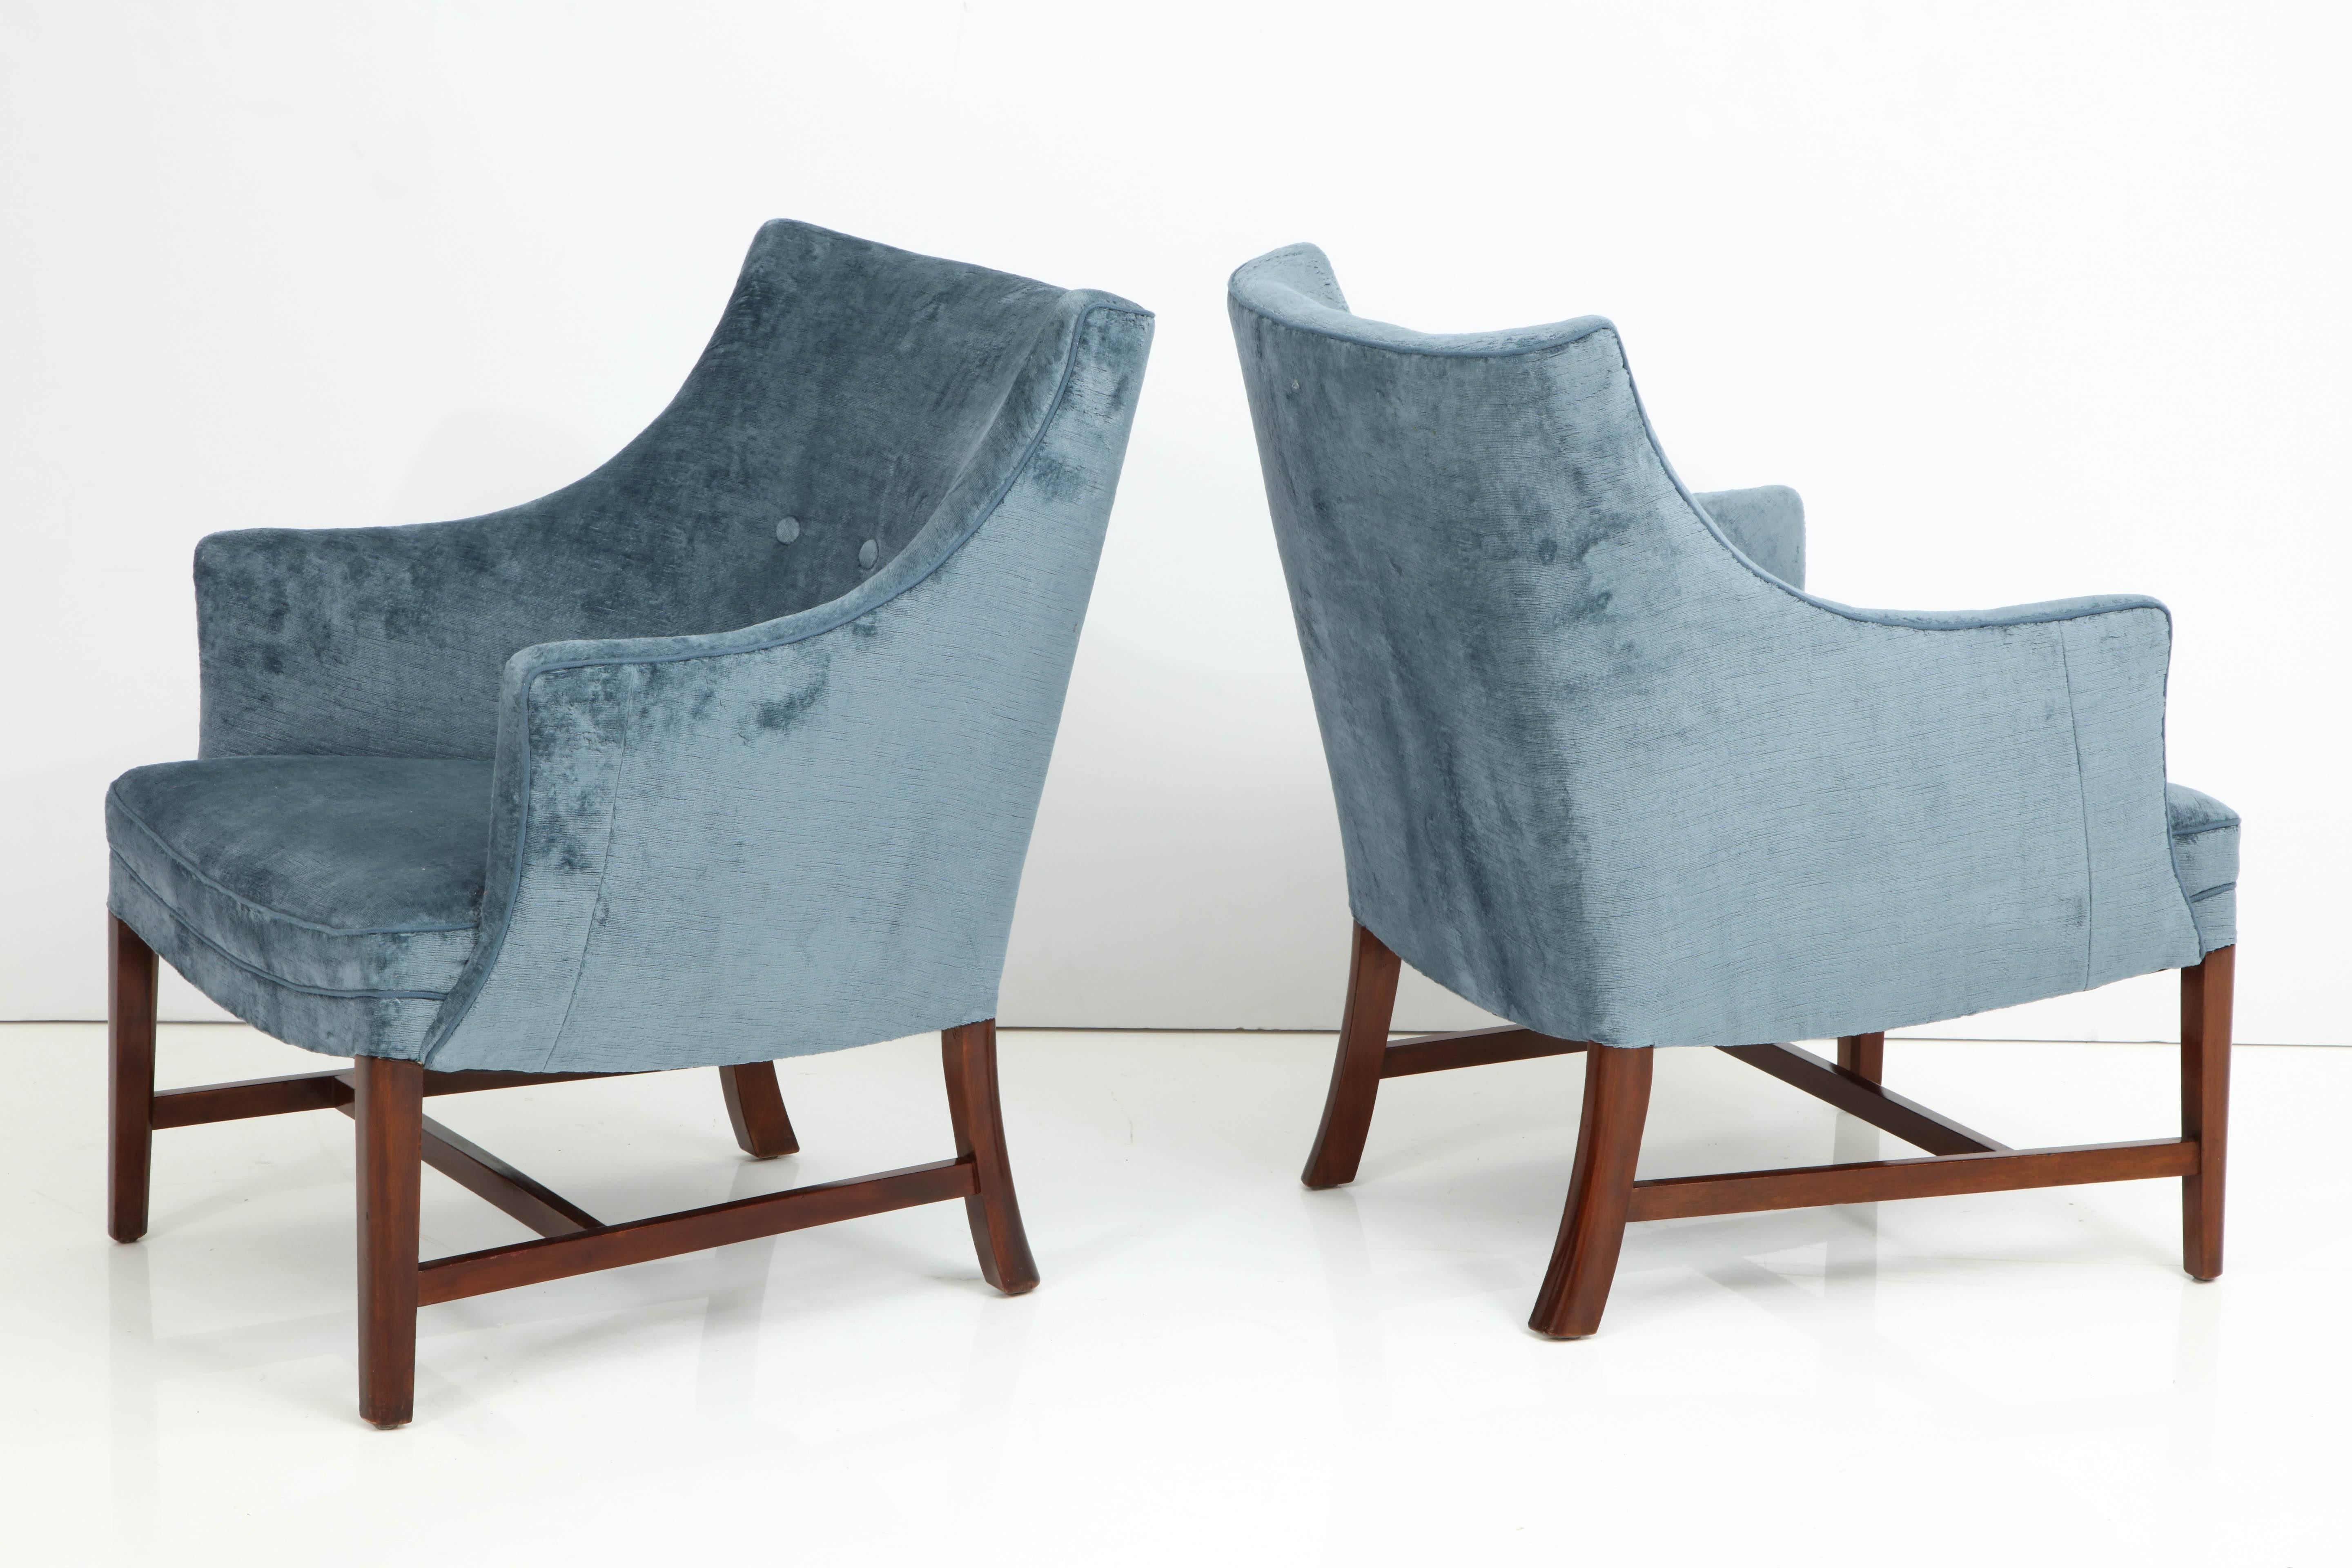 A pair of Frits Henningsen upholstered and mahogany framed armchair, circa 1940. With a curved backrests and downswept armrest raised on square legs joined by an H-form stretcher. New upholstery.